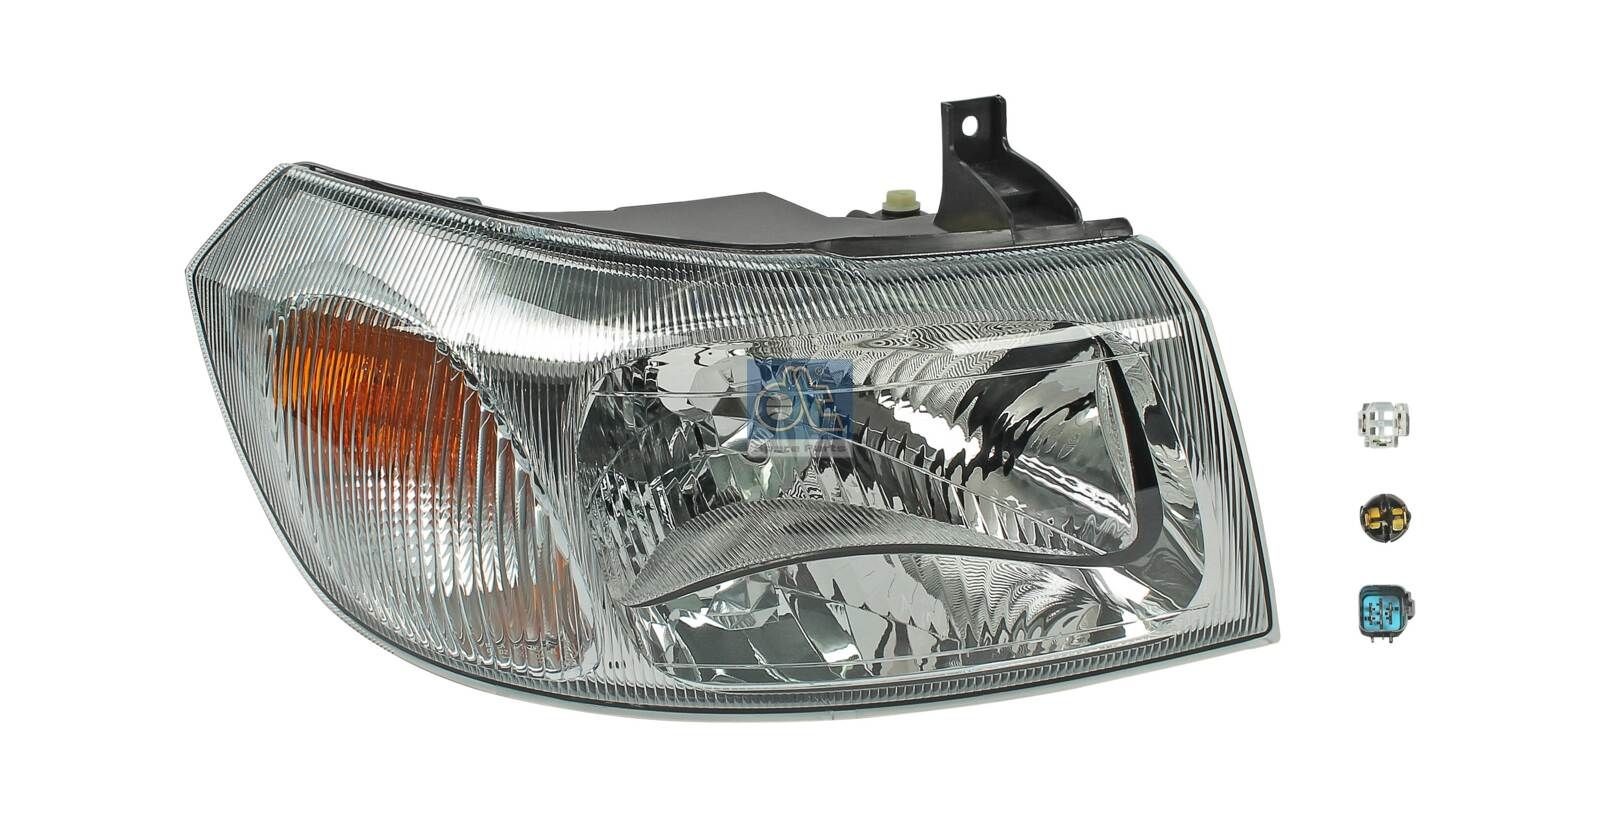 DT Spare Parts 13.77009 Headlight Right, P21/5W, W5W, H4